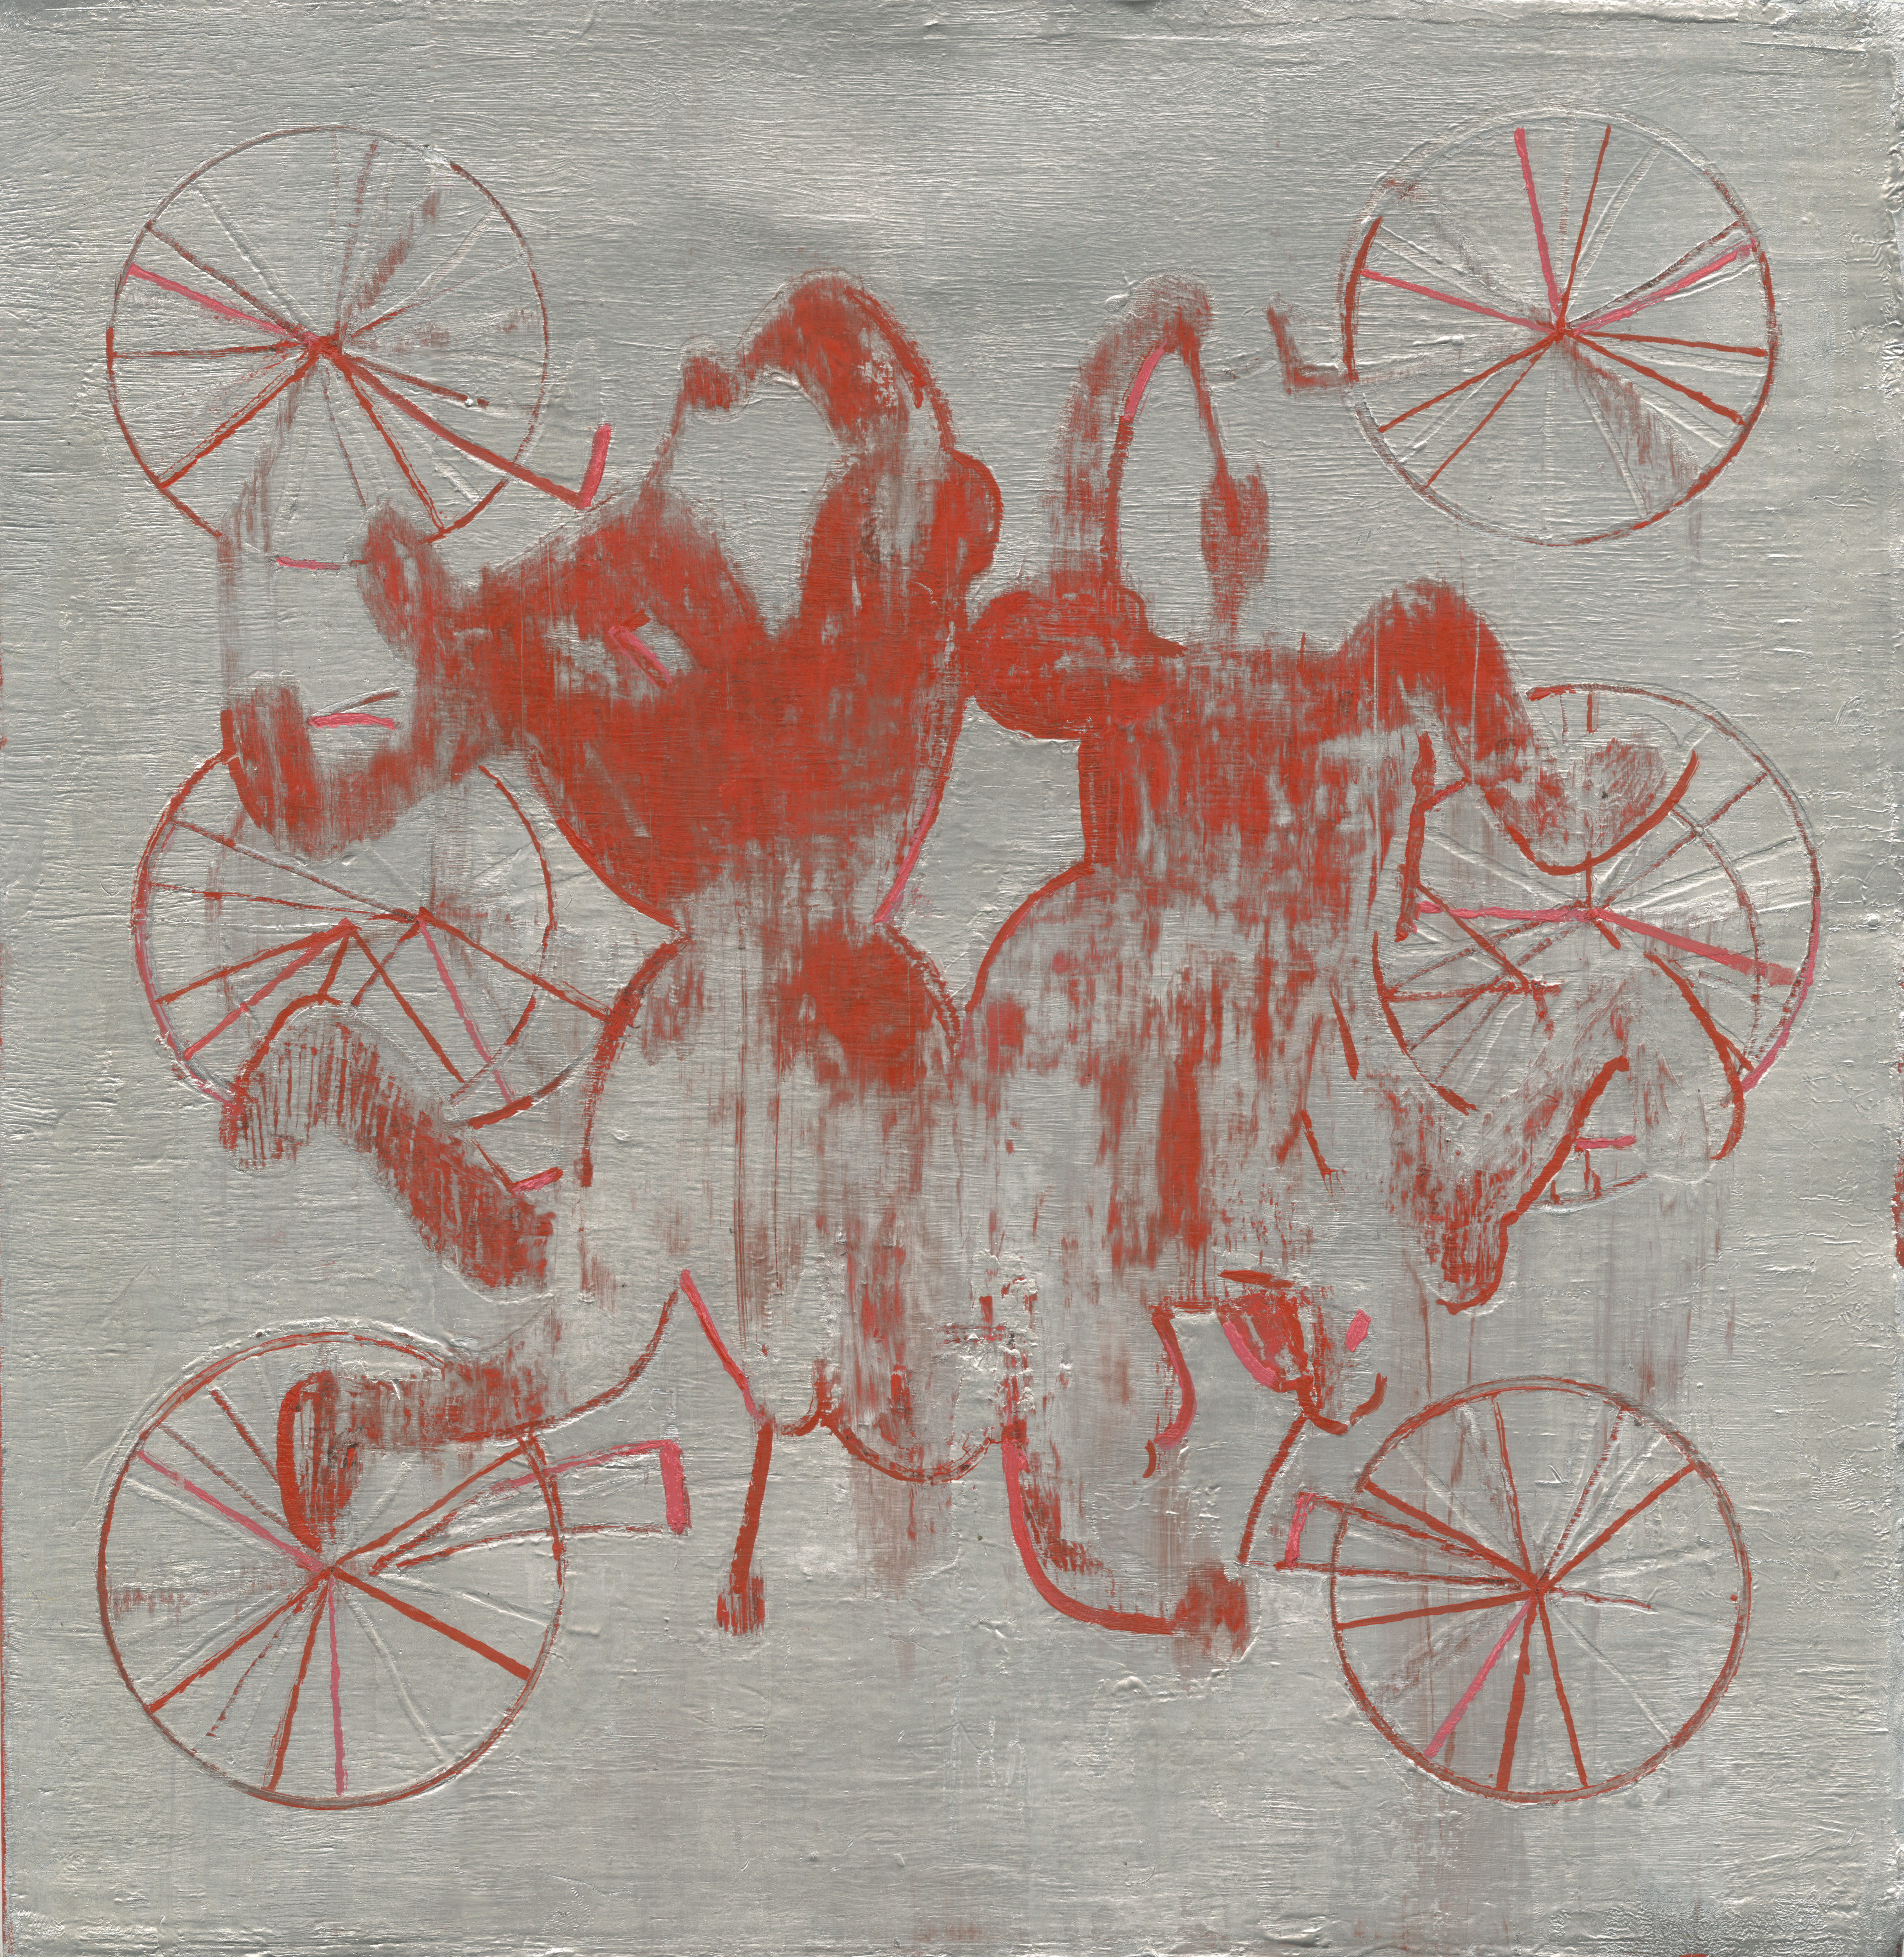 Ivanco Talevski, Monument to The Syrian Bicyclists, 2016 Oil on paper